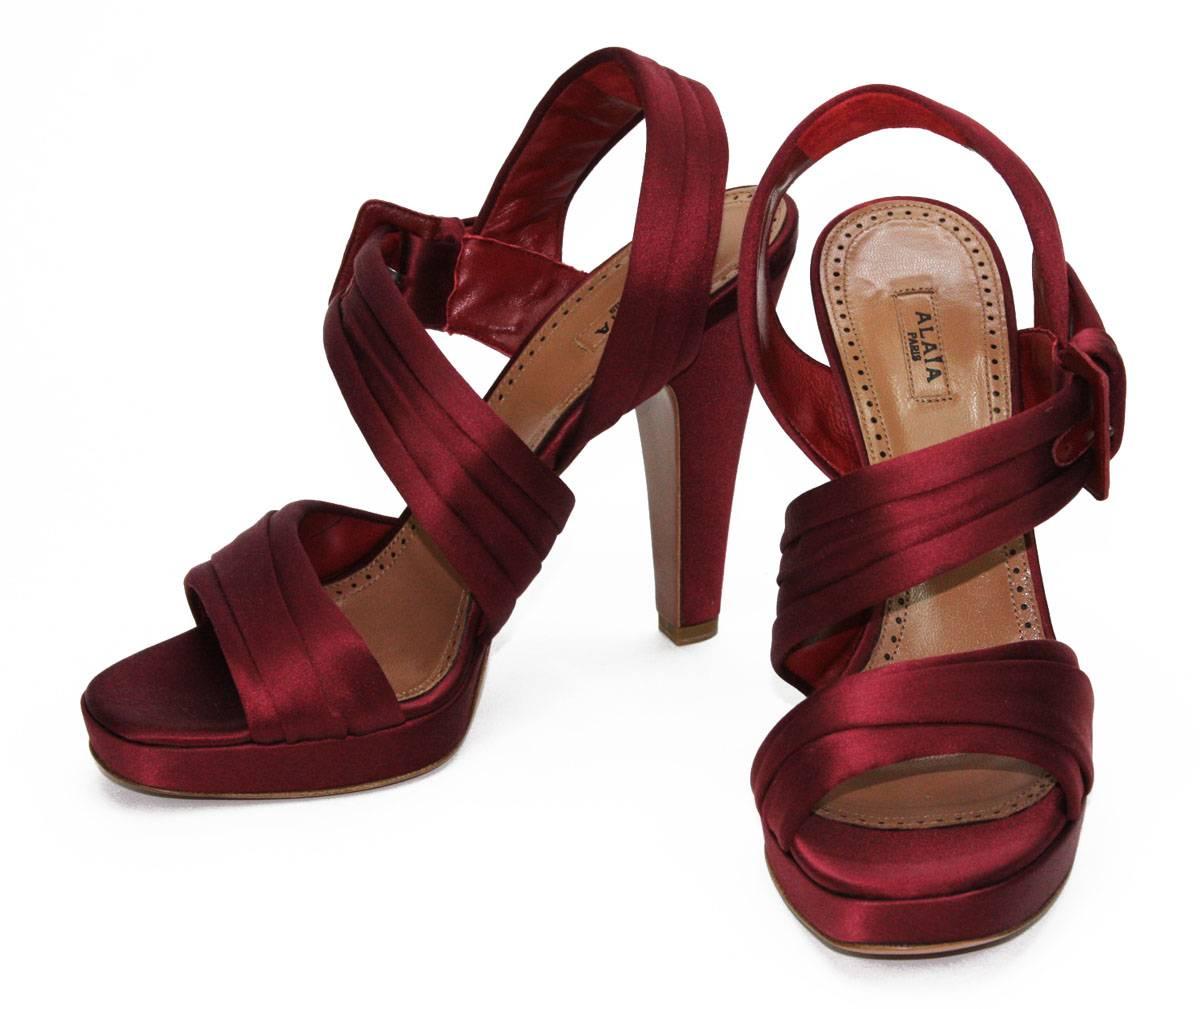 New AZZEDINE ALAIA Satin Shoes Sandals
Color: Deep Burgundy
Italian size 39.5 or US 9.5
Burgundy Satin & Red Leather Lining
Red Leather Side Buckle Closure
Platform - 3/4 inches
Heel - 5 inches 
Leather sole and insole
Retail $980.00
Made in